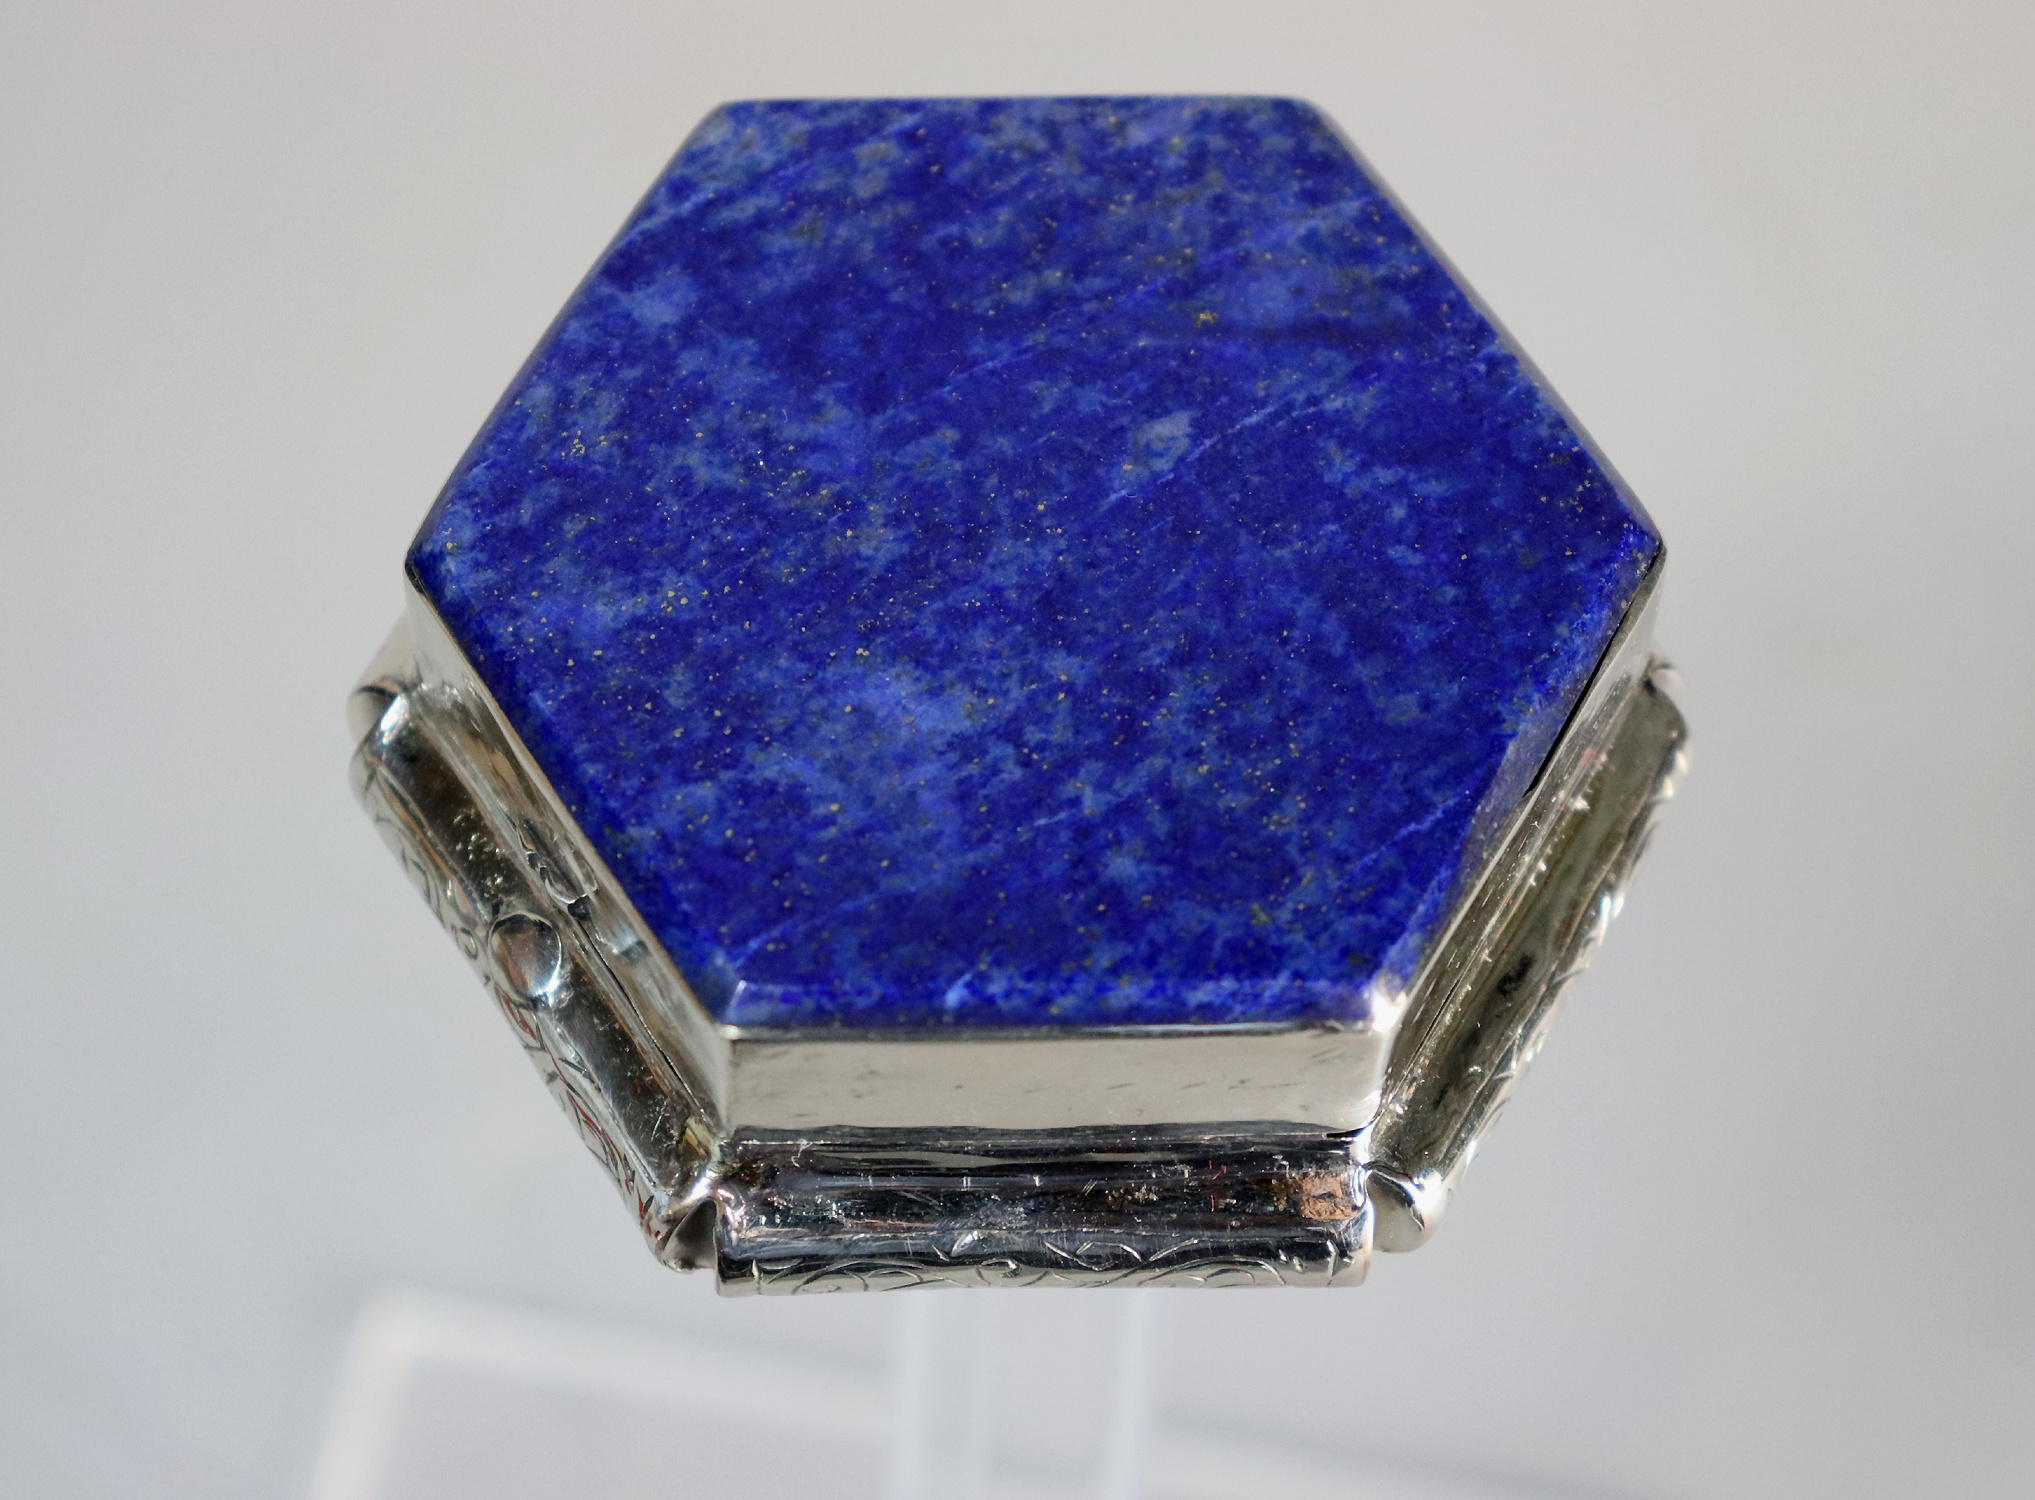 vintage Hand Crafted stunning Afghan Pillbox Box brass Lapis lazuli Gemstone decorated from Afghanistan No:IT54-63